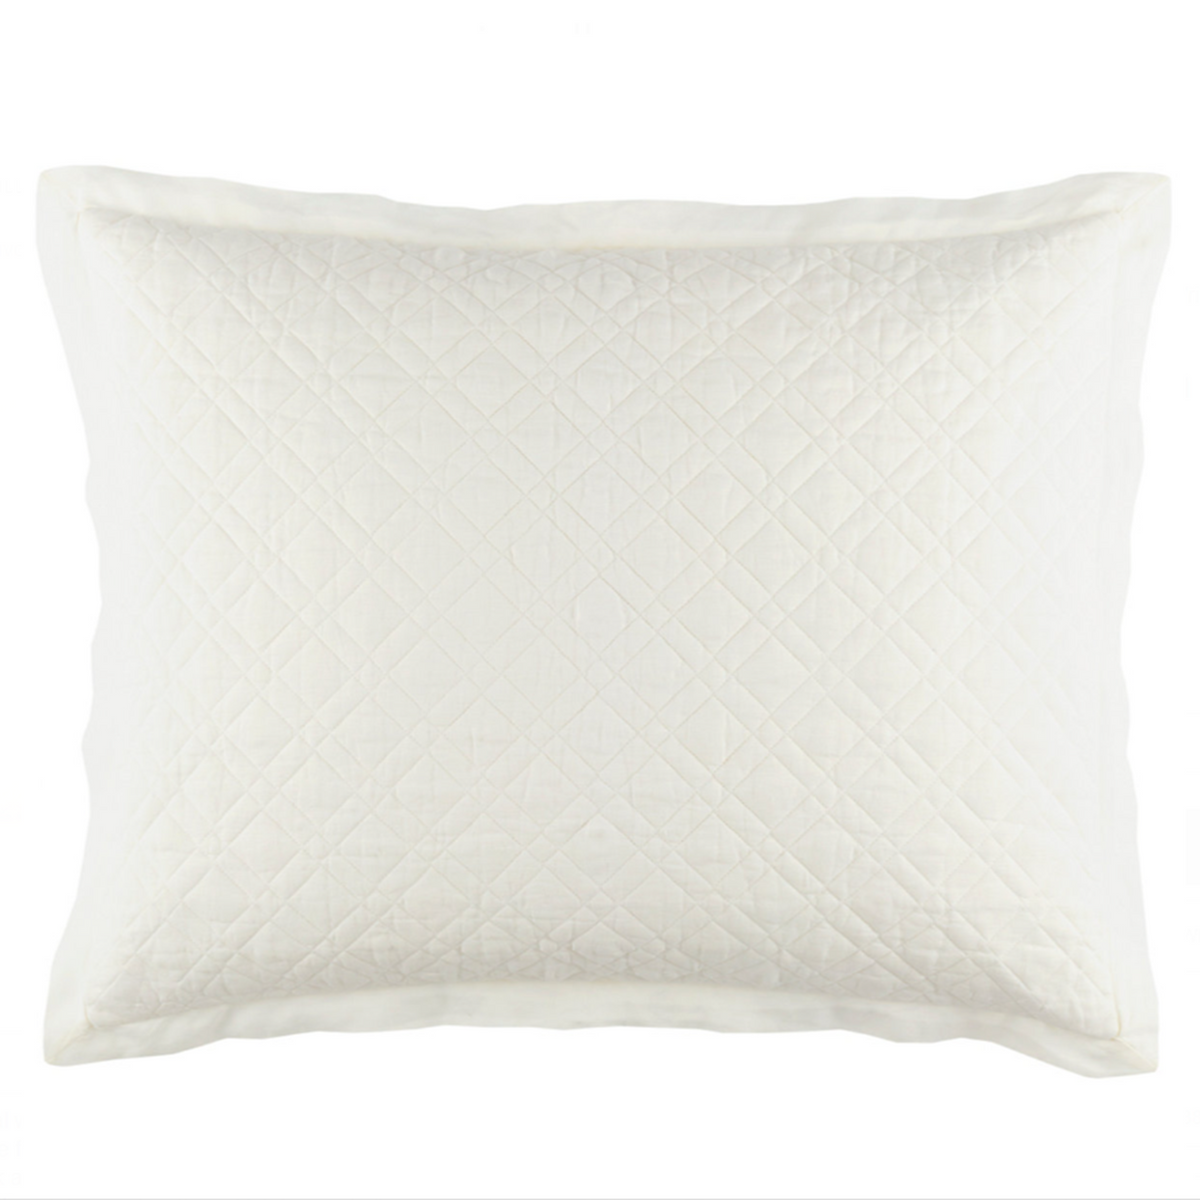 Sham of Pine Cone Hill Washed Linen Quilted Bedding in Color Ivory